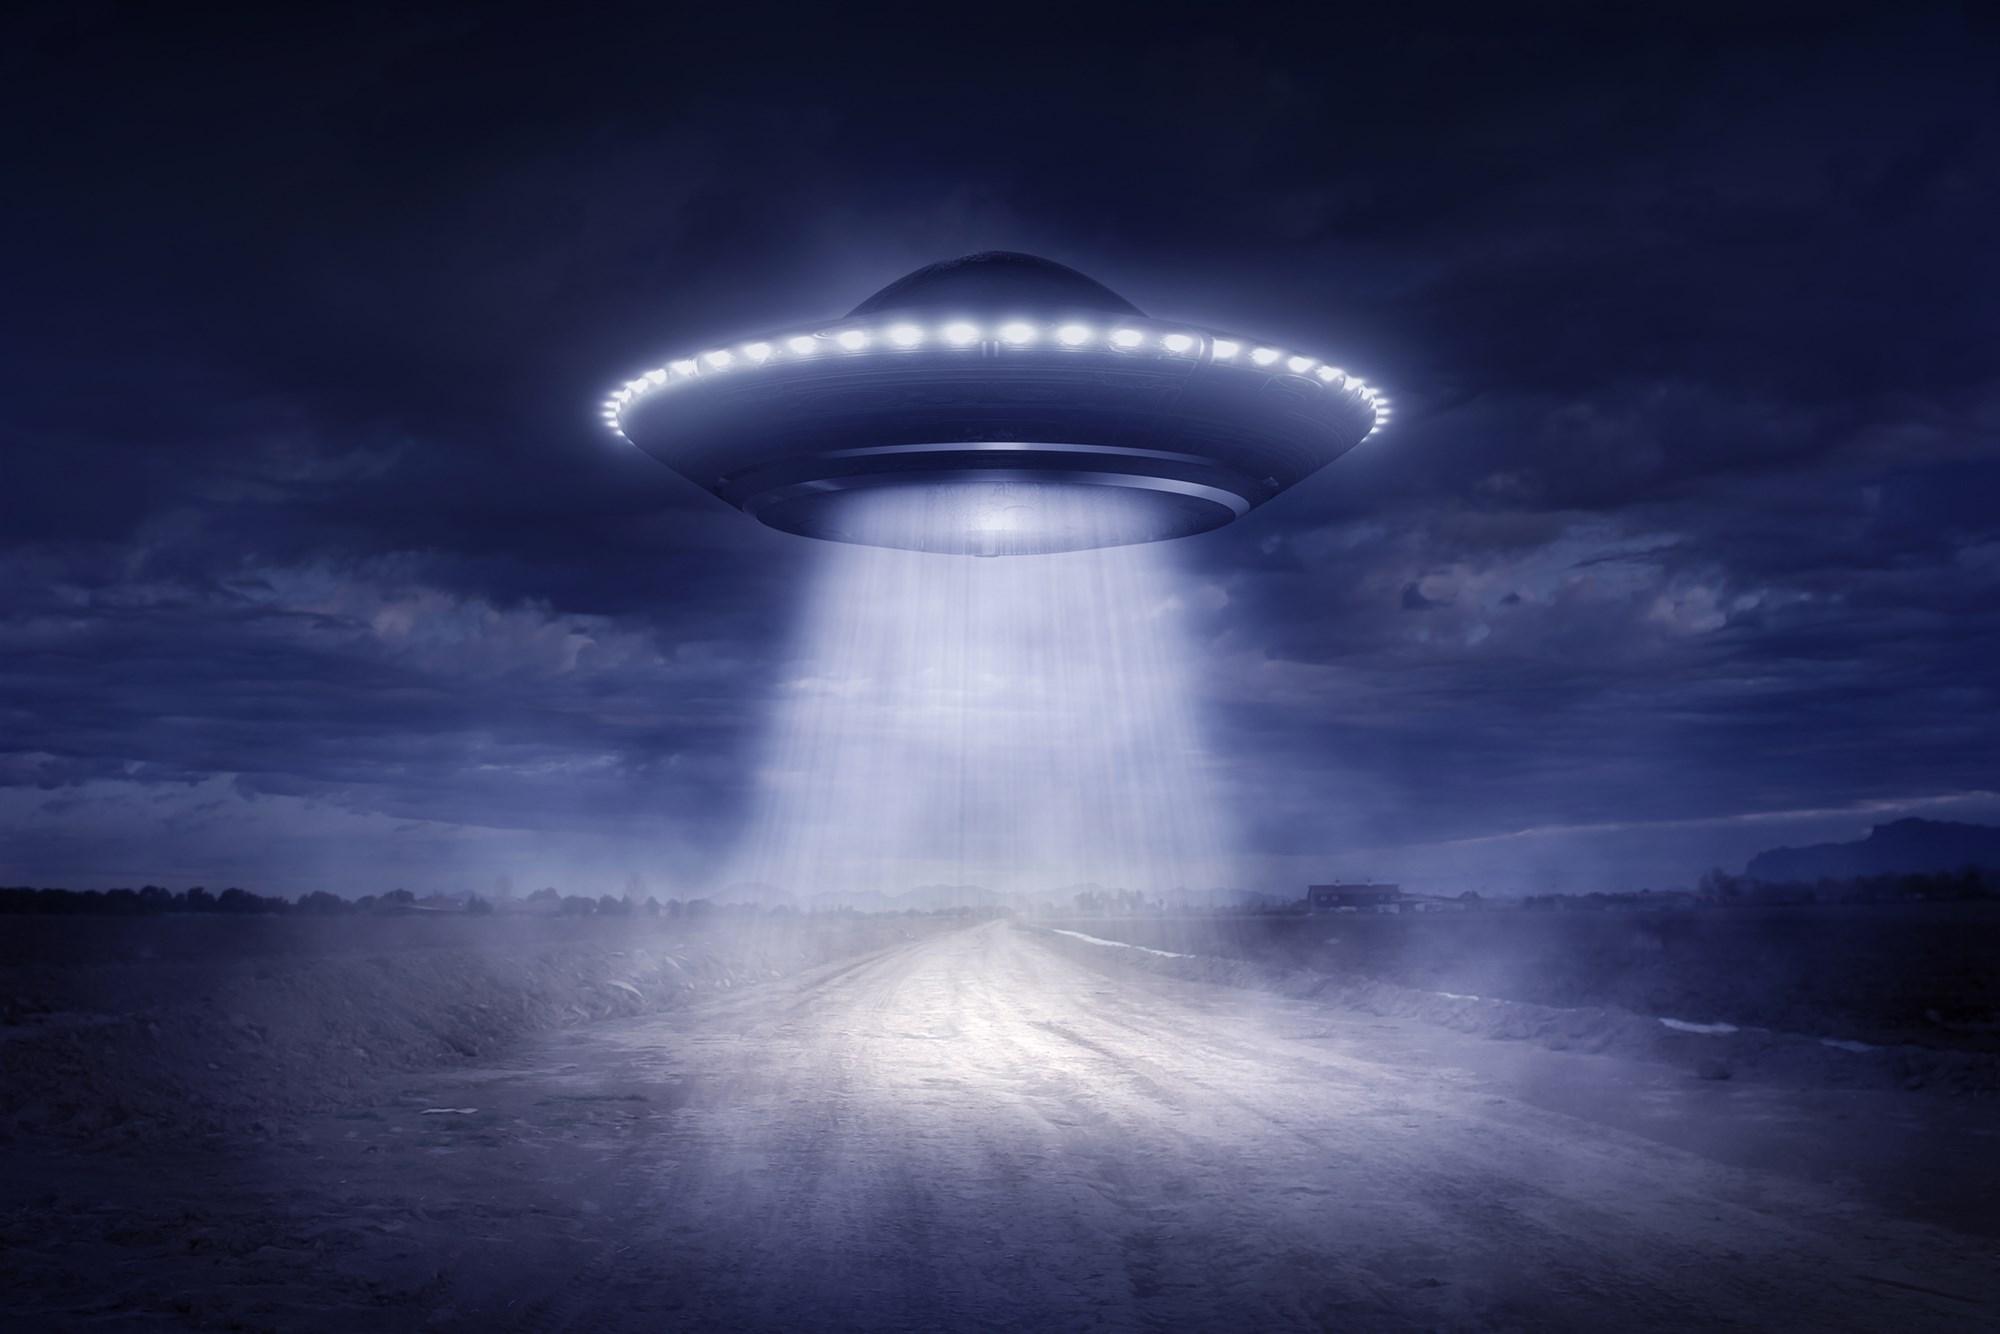 Image of a flyring saucer beaming down on a deserted road